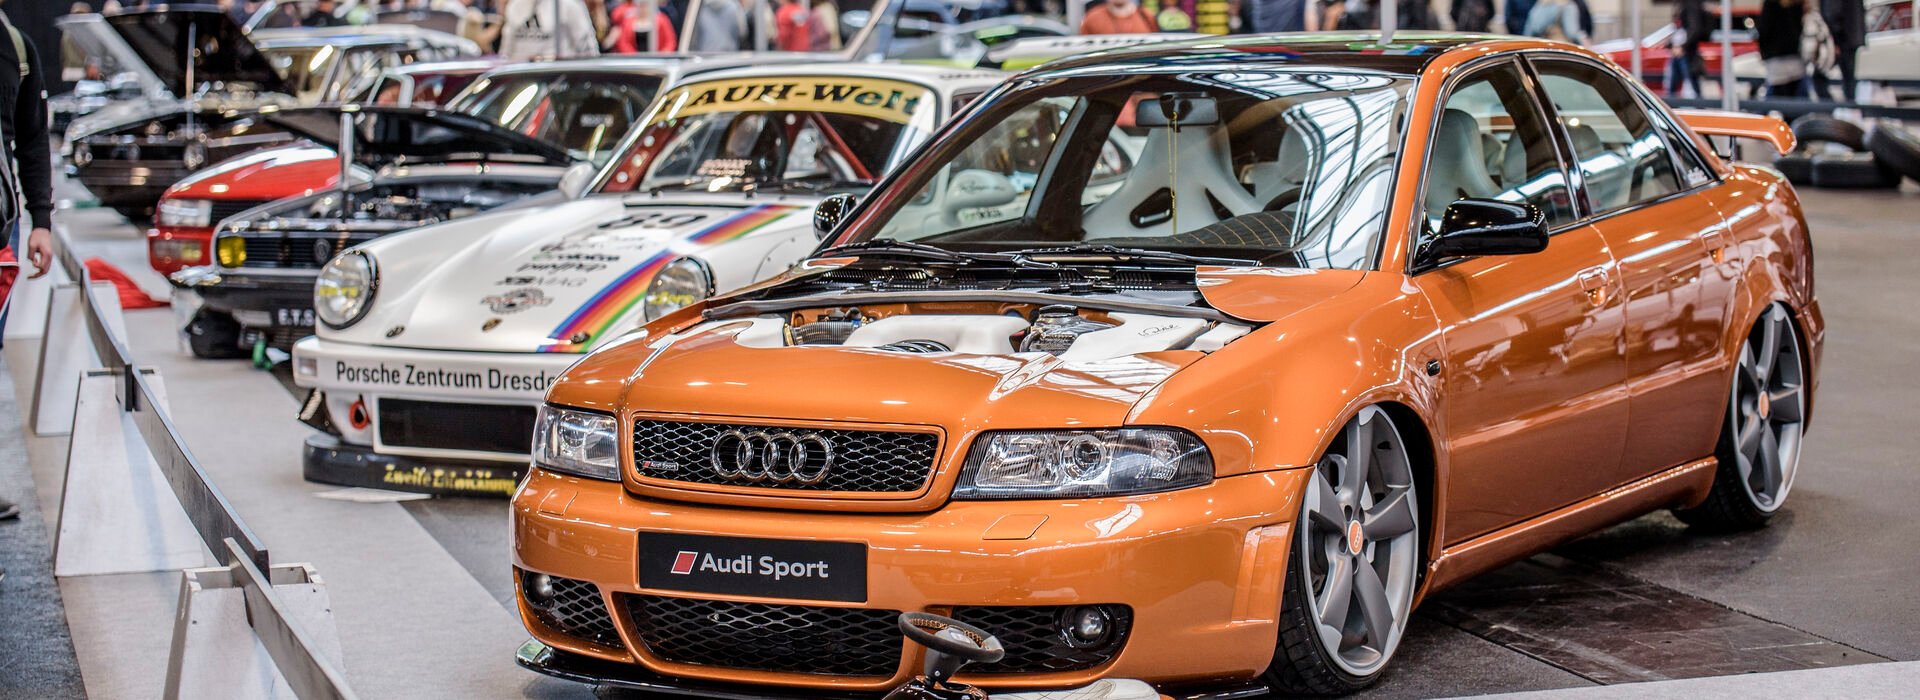 Tuning World Bodensee 2021